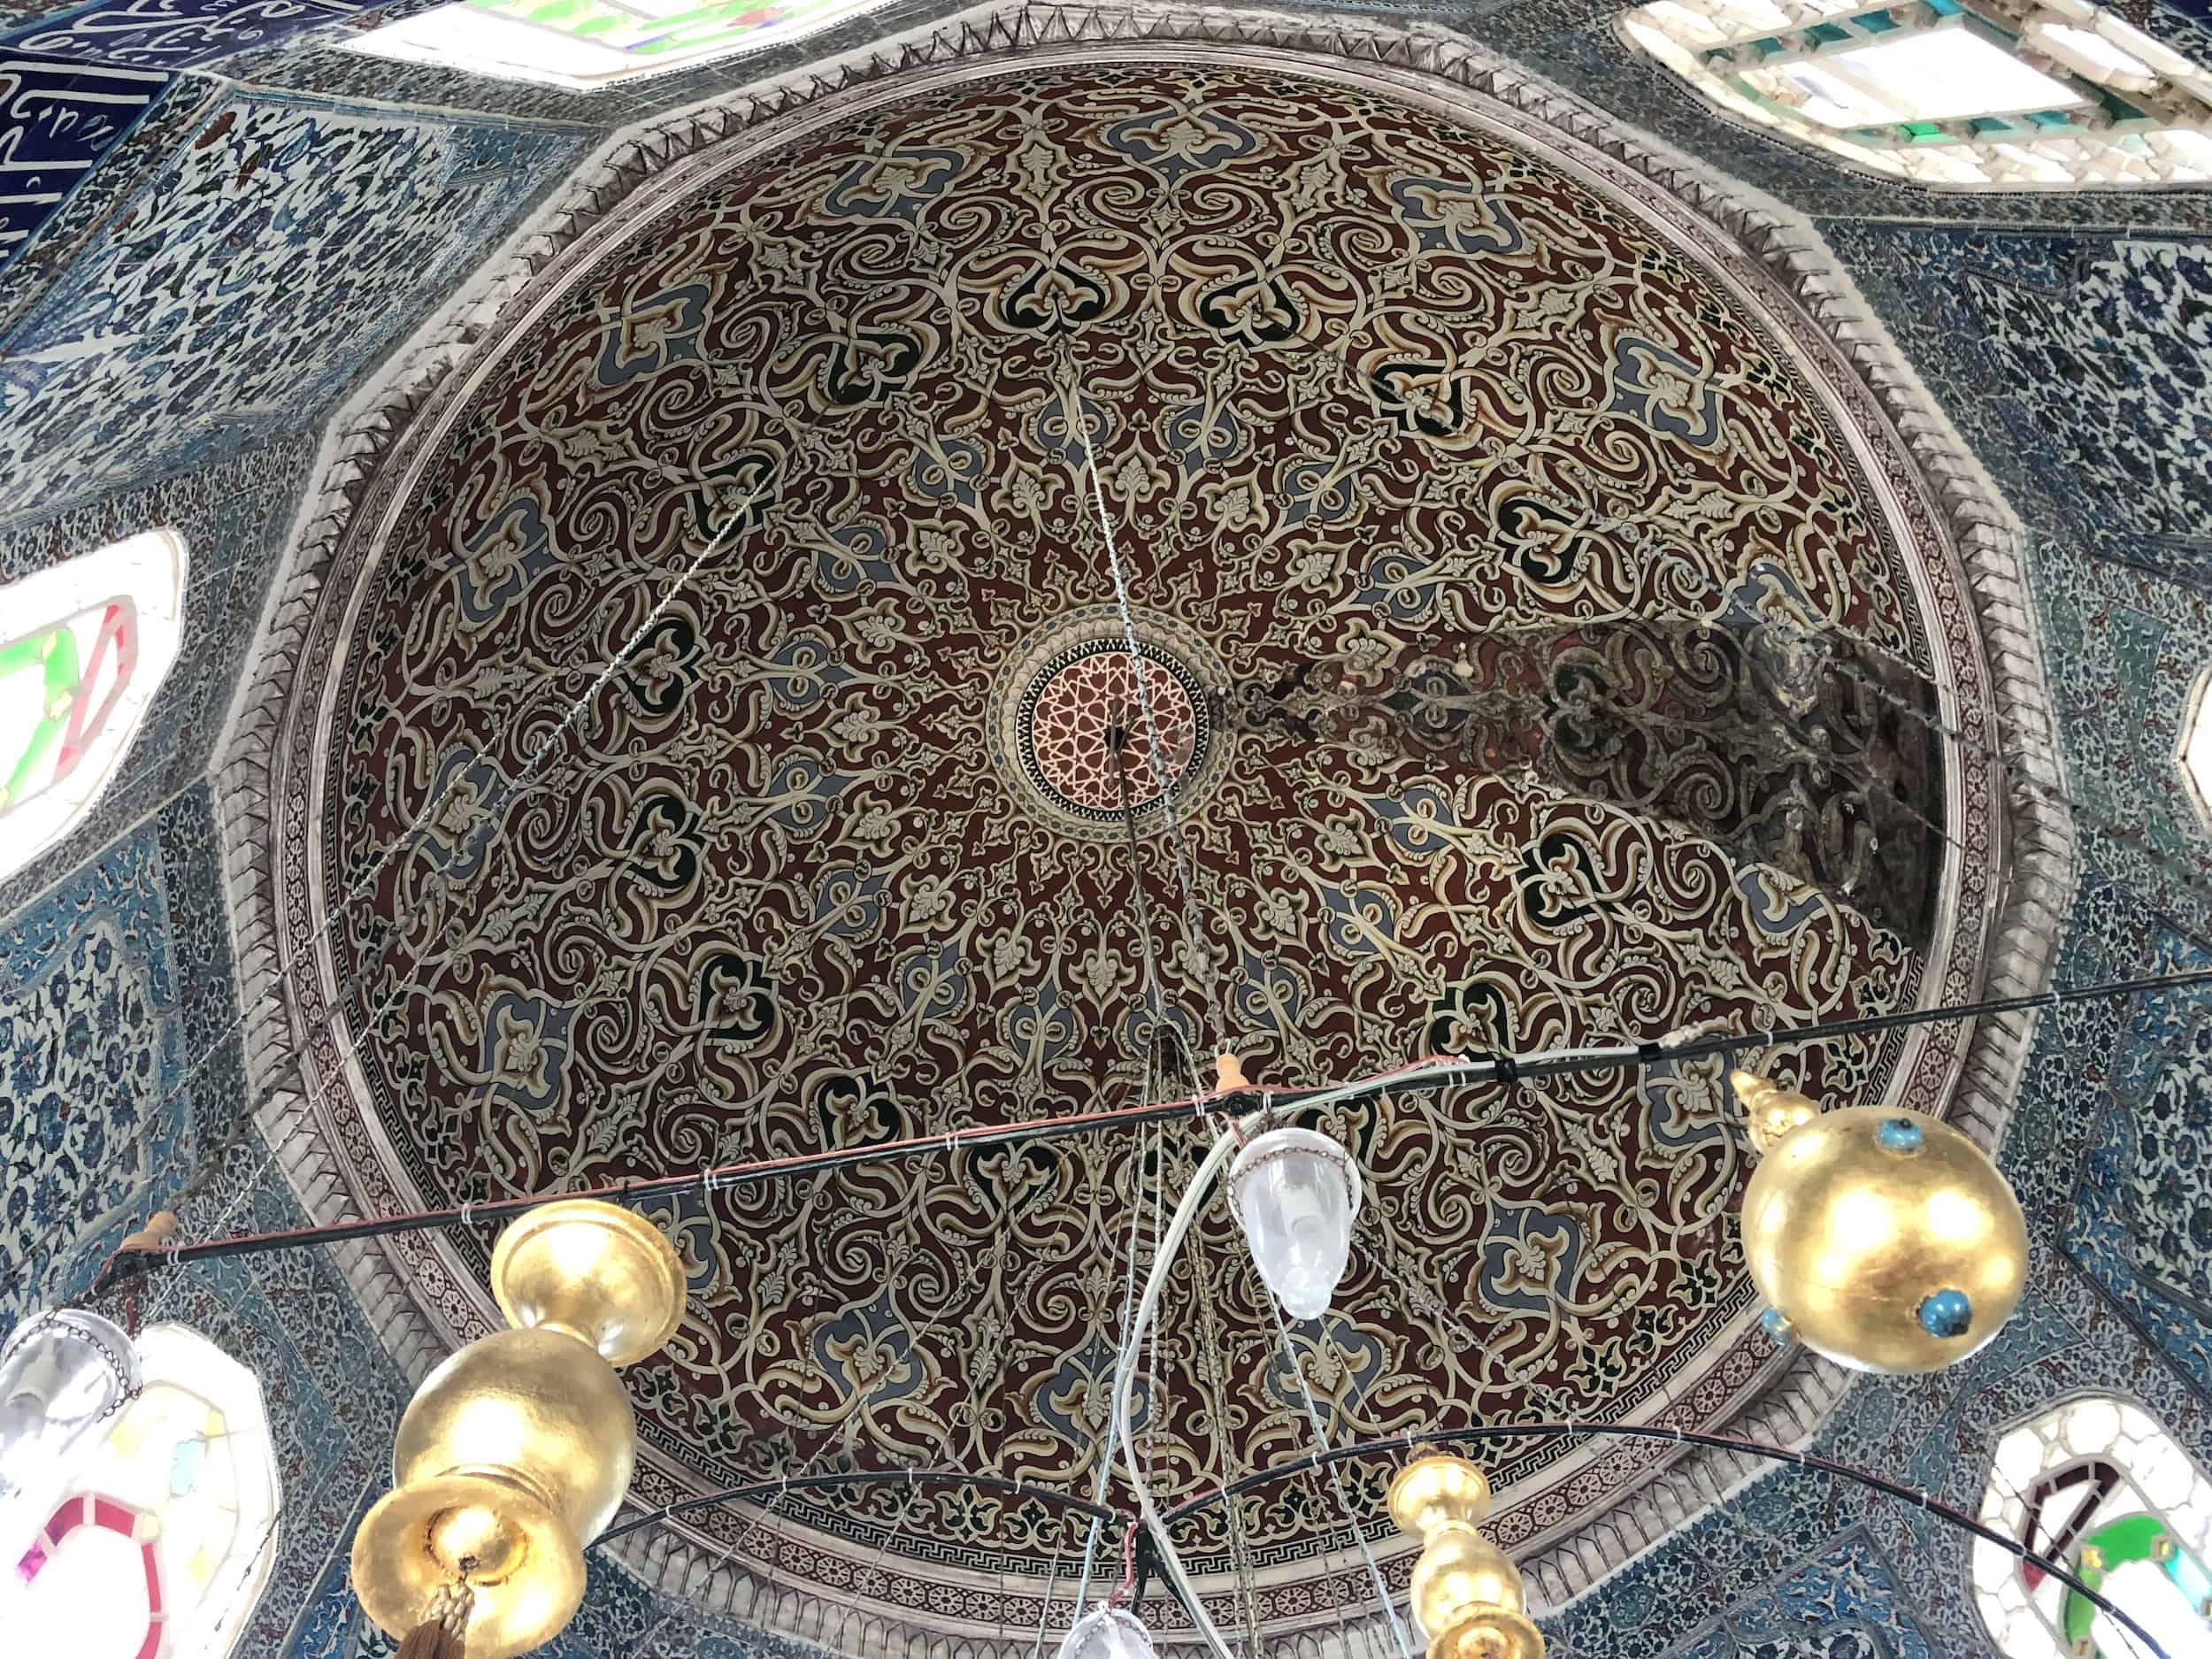 Dome of the Tomb of Damat Ibrahim Pasha at the Şehzade Mosque Complex in Istanbul, Turkey